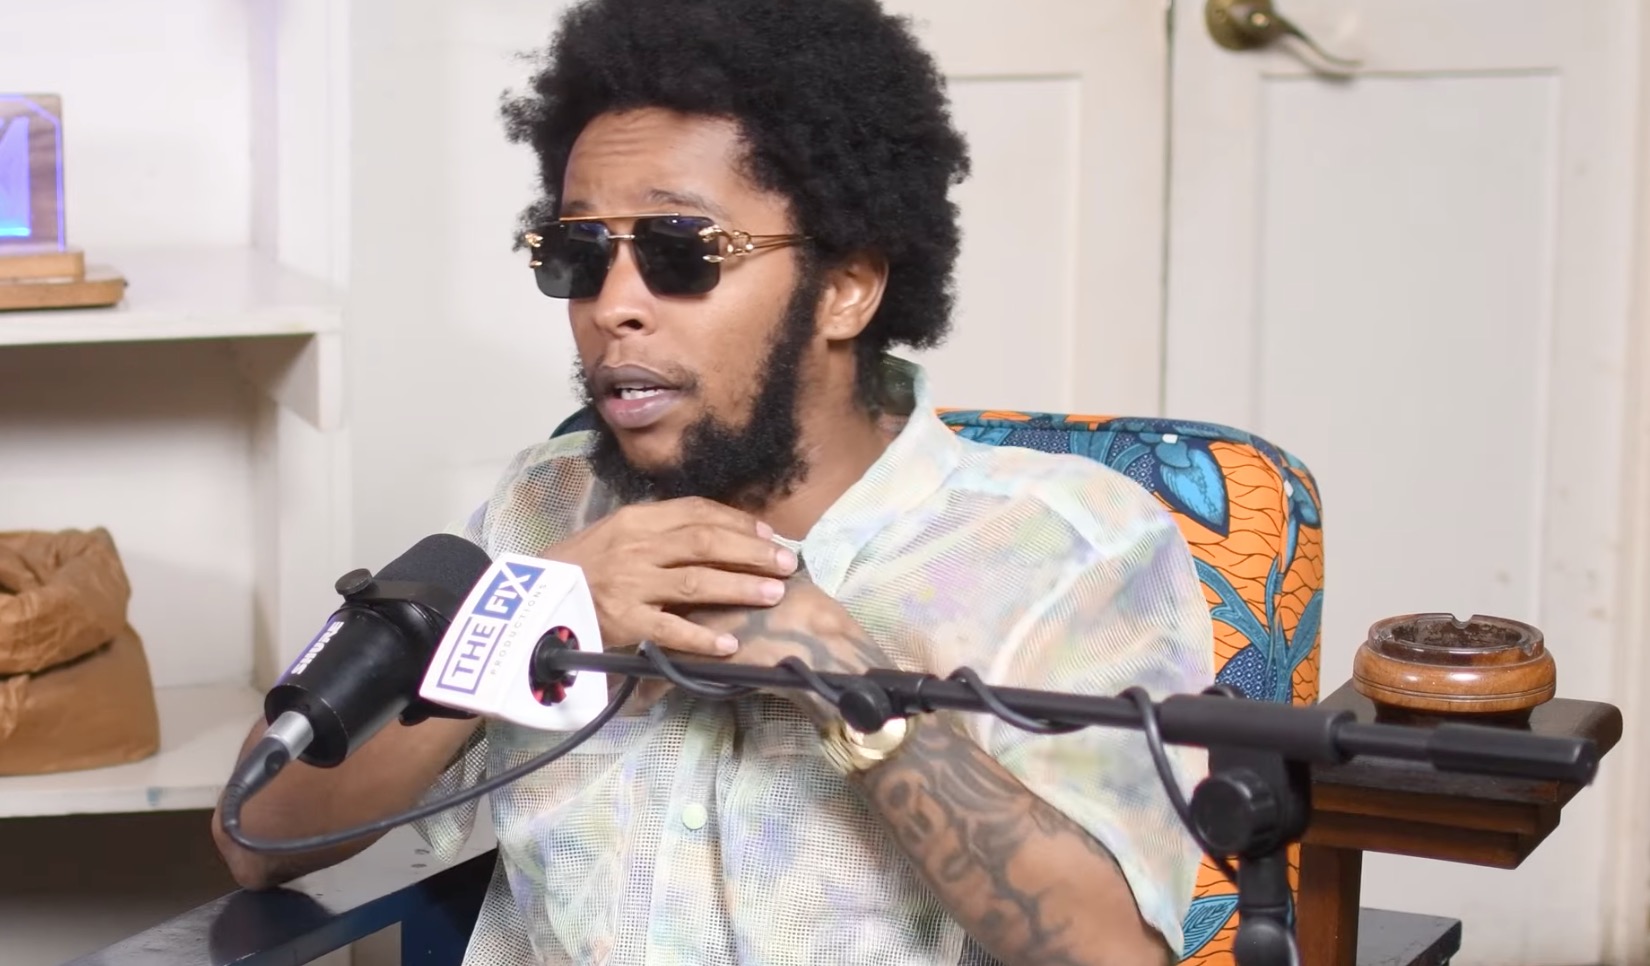 Shane O Speaks on Demarco, Sting, “Wicked” Artistes in Jamaica, and Ghostwriting - Watch Interview